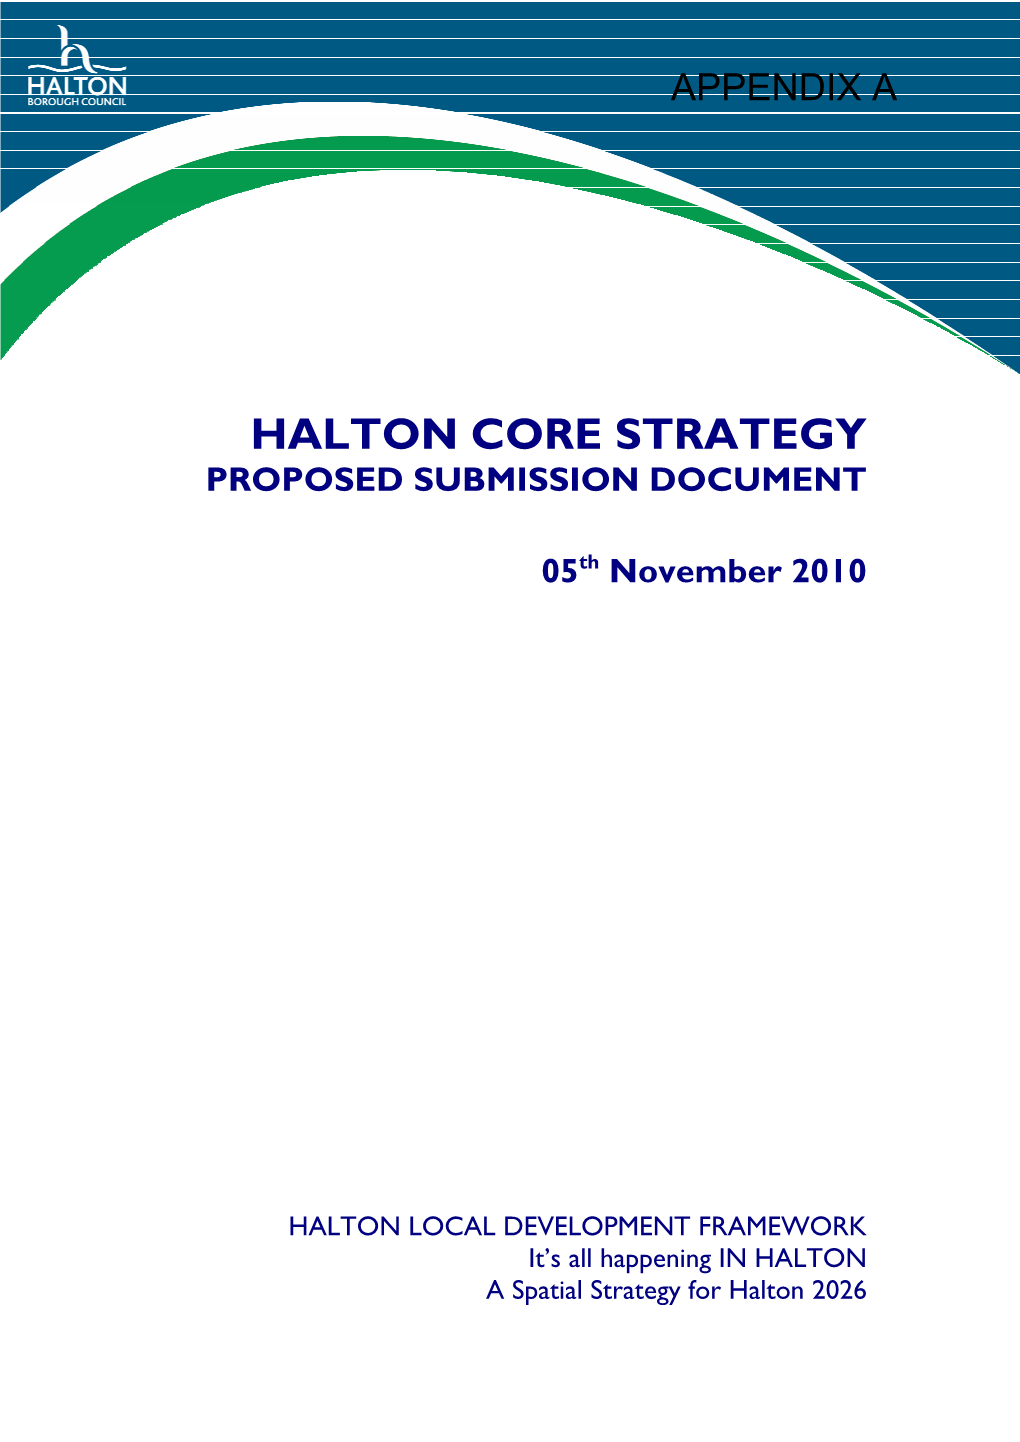 Halton Core Strategy Proposed Submission Document